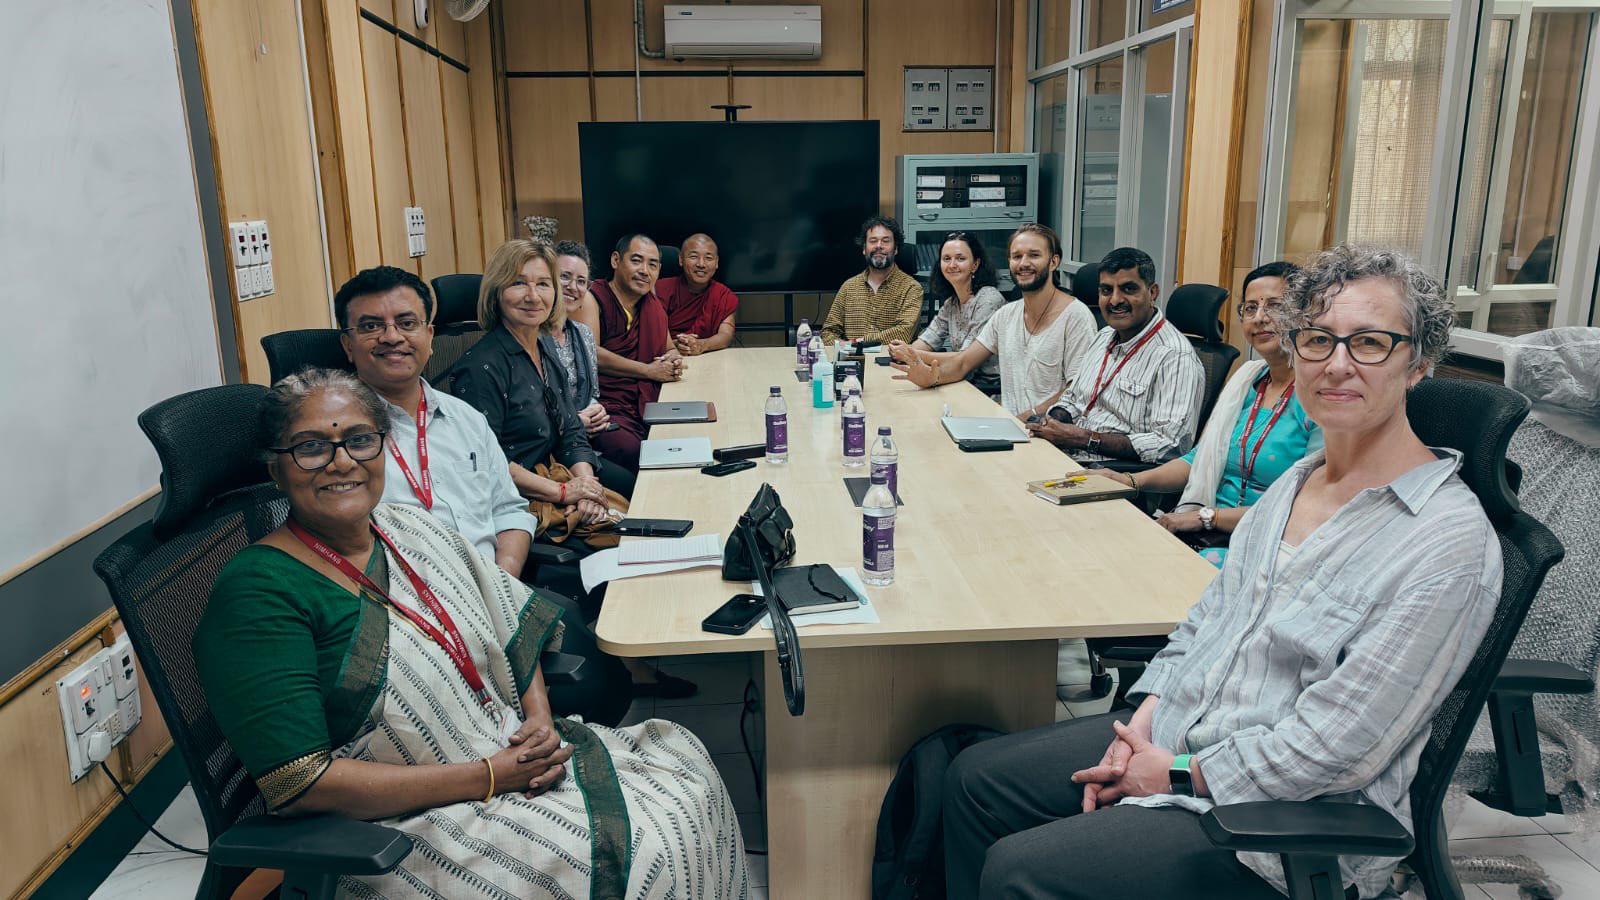 During Goldman and Tidwell's trip, they visited India’s National Institute of Mental Health and Neurosciences. Pictured here is the Tukdam Project team in the Center for Consciousness Studies conference room.